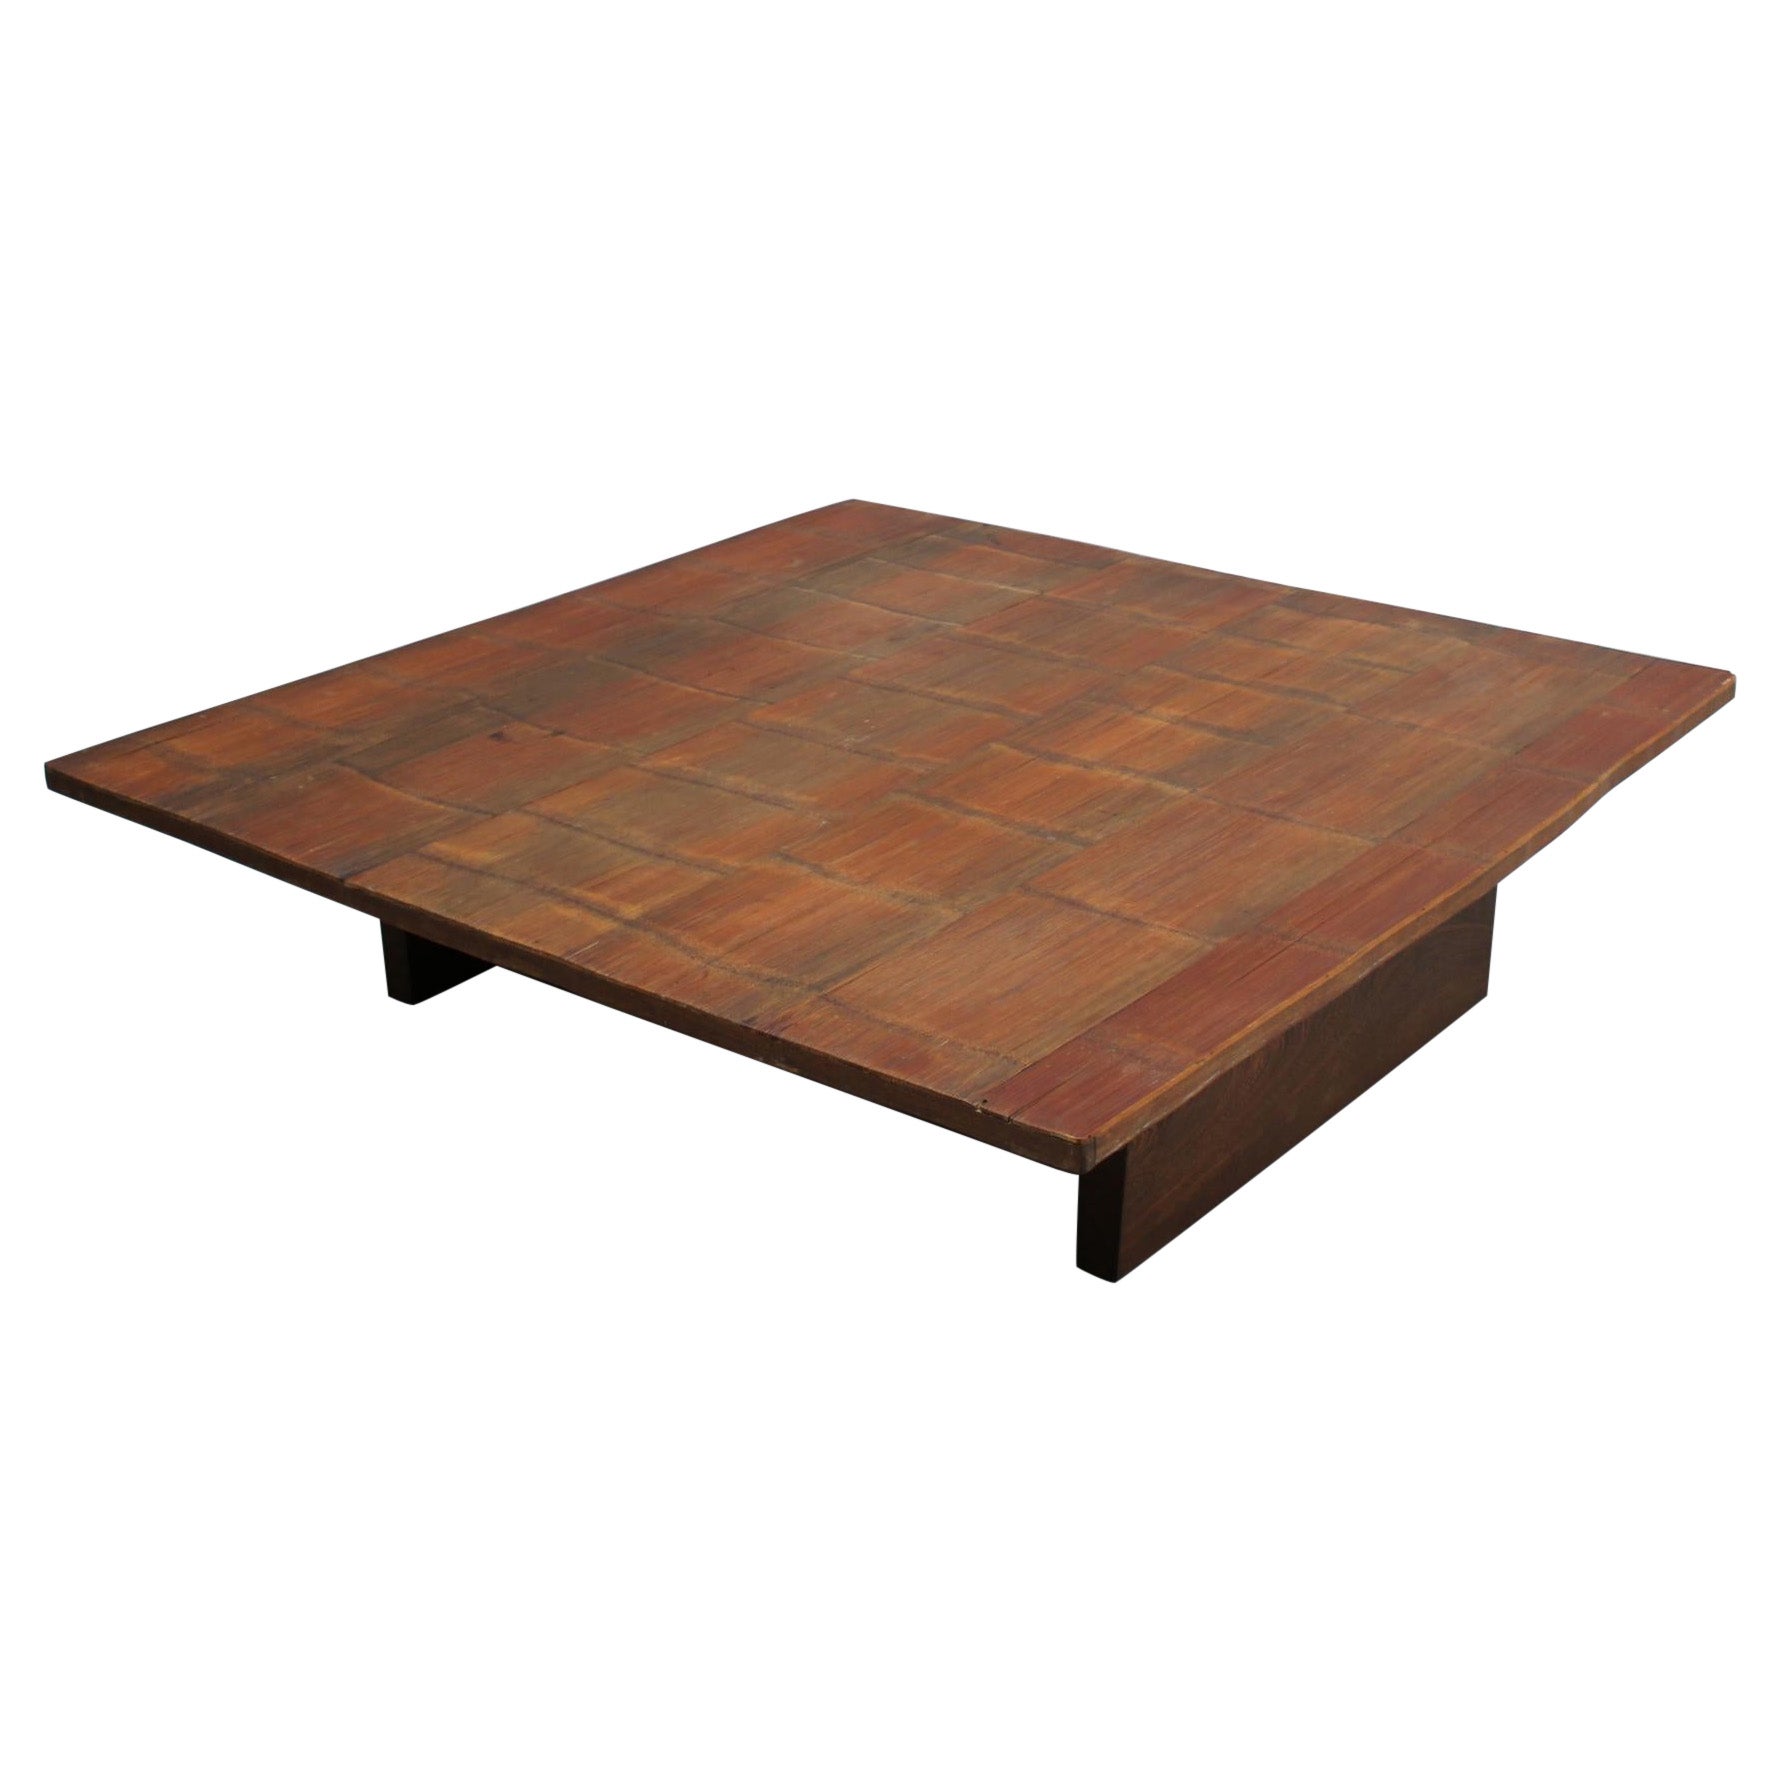 Axel Vervoordt, Large 1980s Coffee Table with a Bamboo Top in a Japanese Style